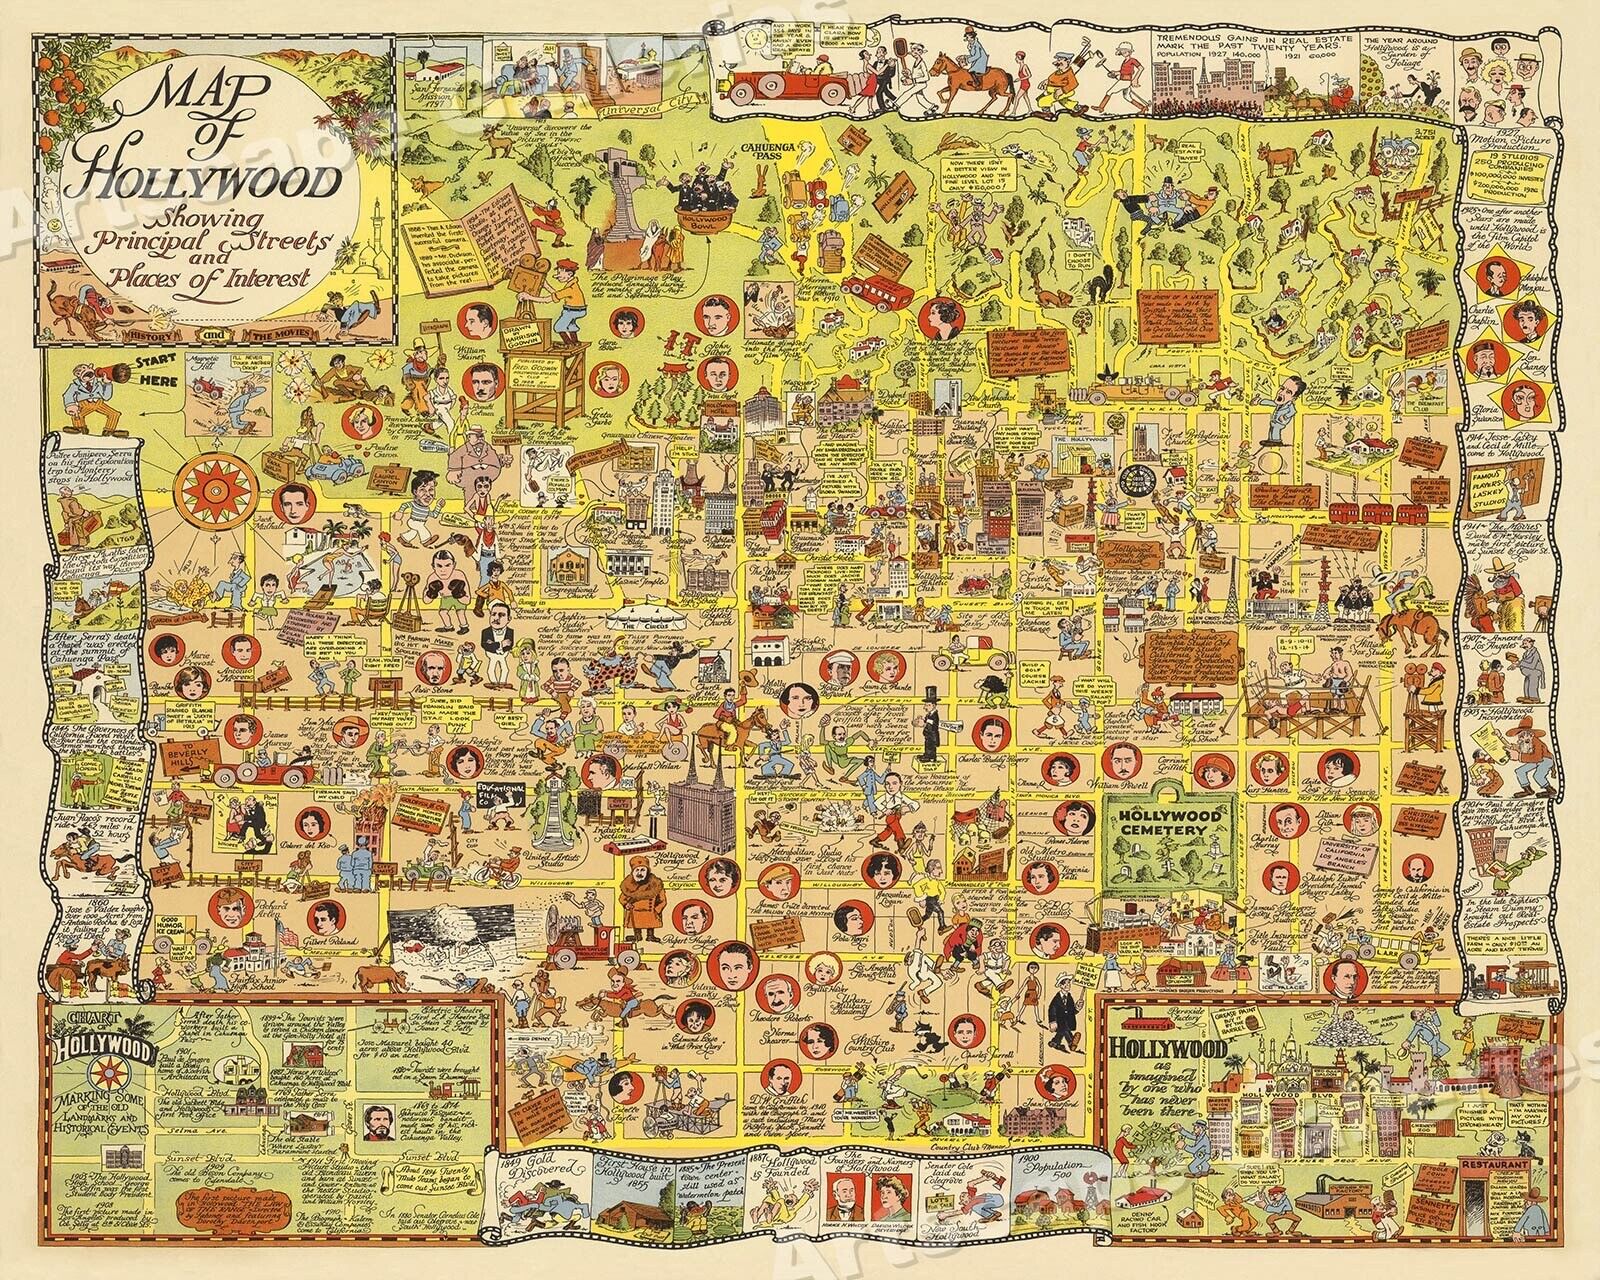 Hollywood 1928 Vintage Pictorial Map - 20x24